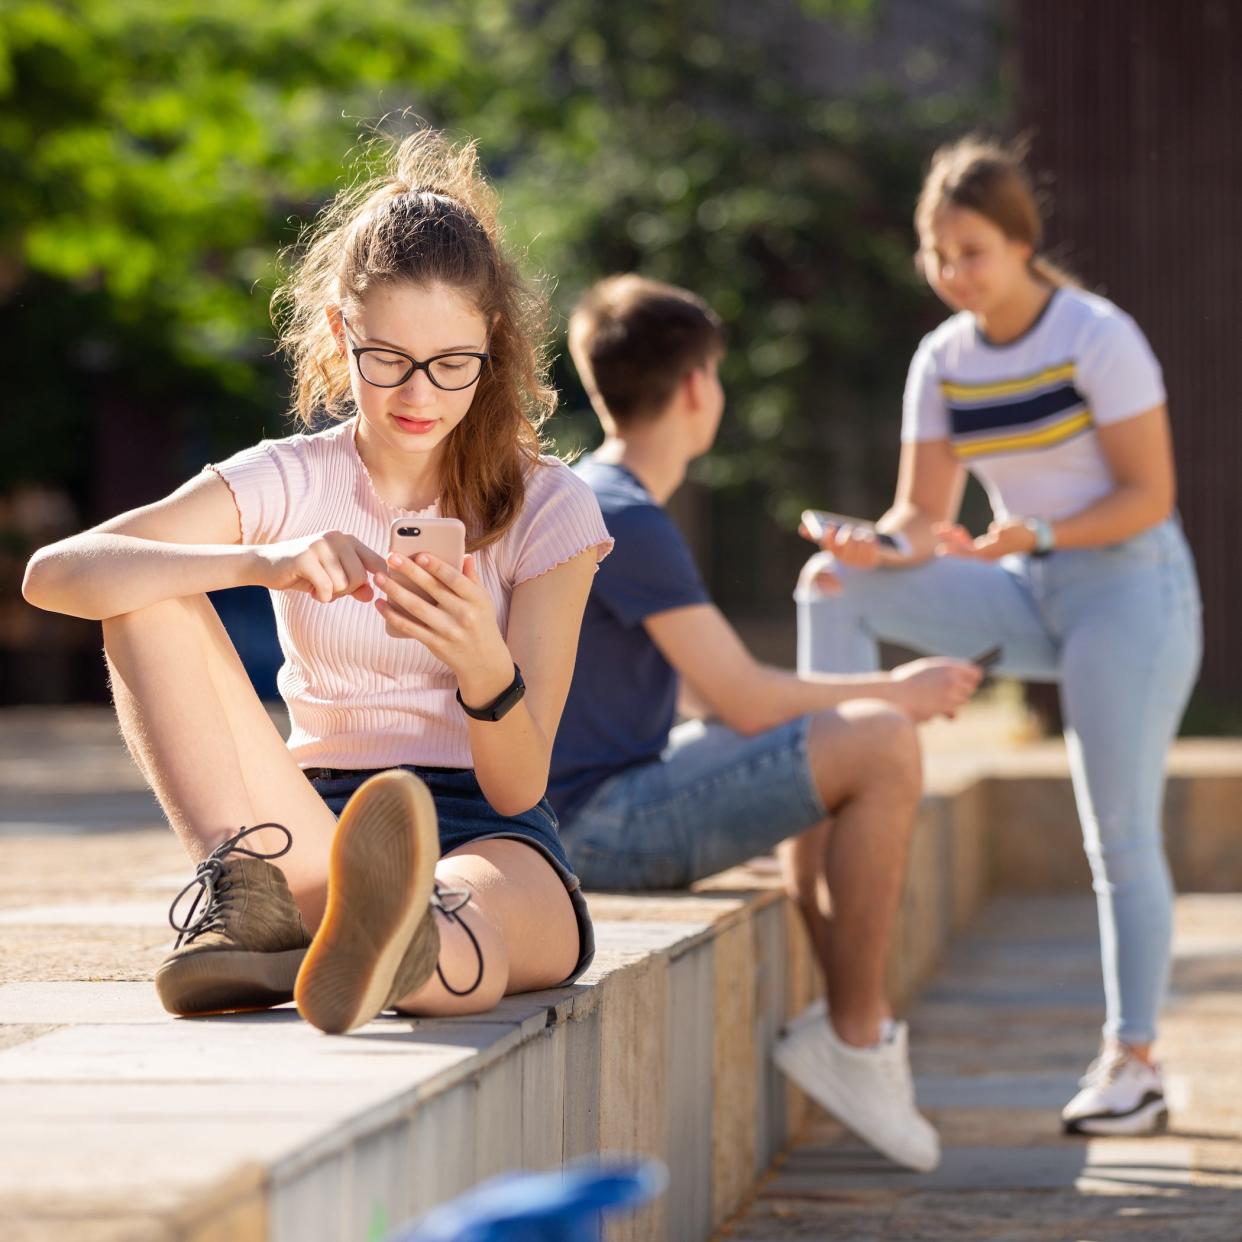 Portrait of teen girl checking her smartphone while outdoors on summer day